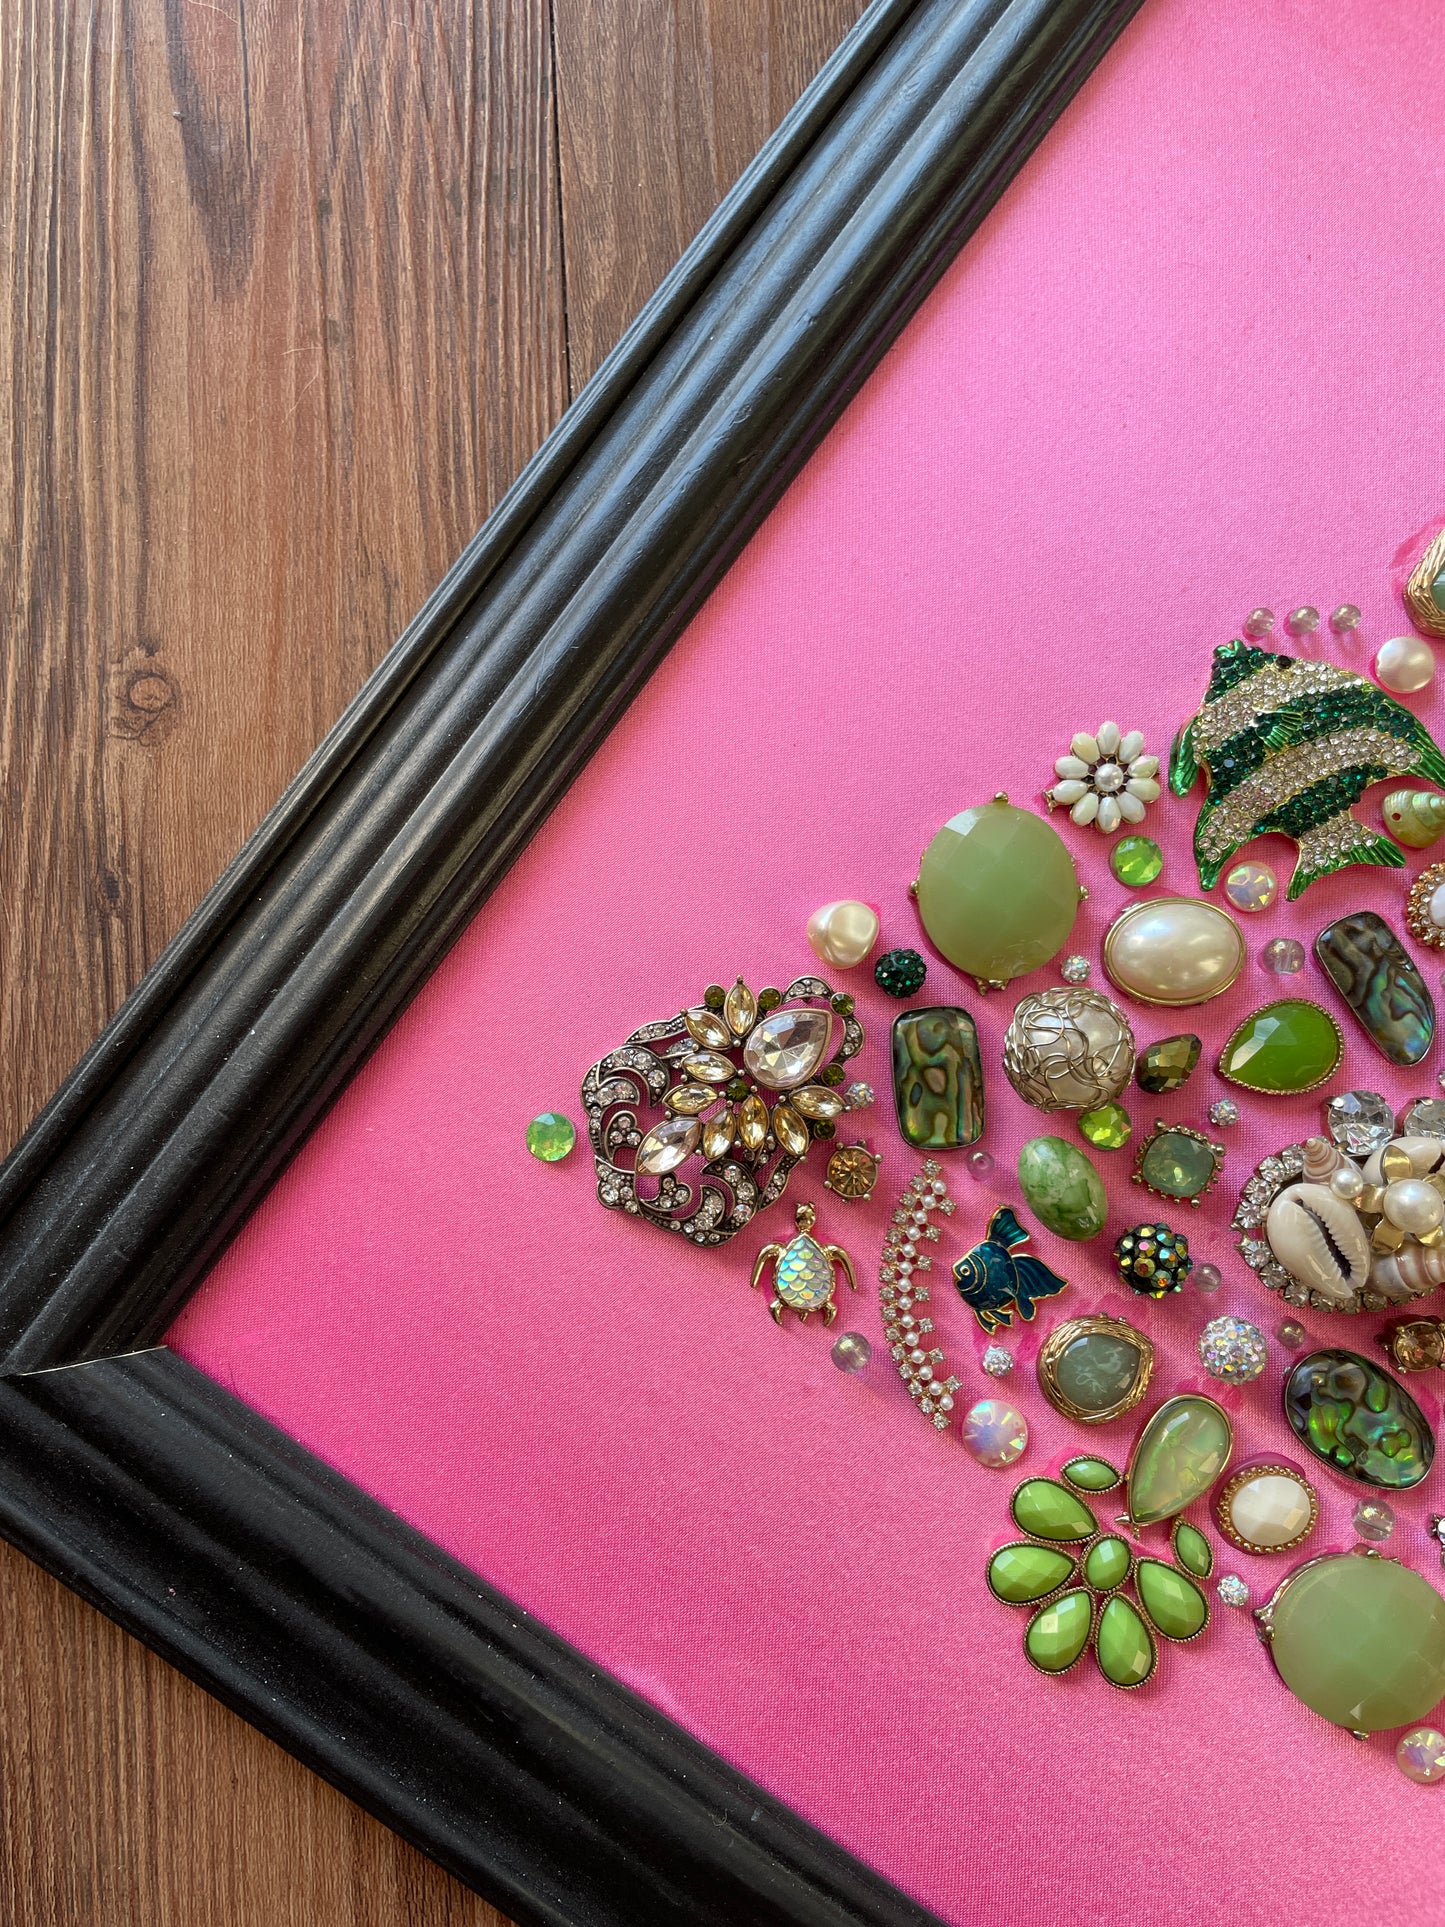 Pink, Green, and Black Framed Jewelry Christmas Tree Handmade with Over 50 Pieces of Vintage & Upcycled Jewelry